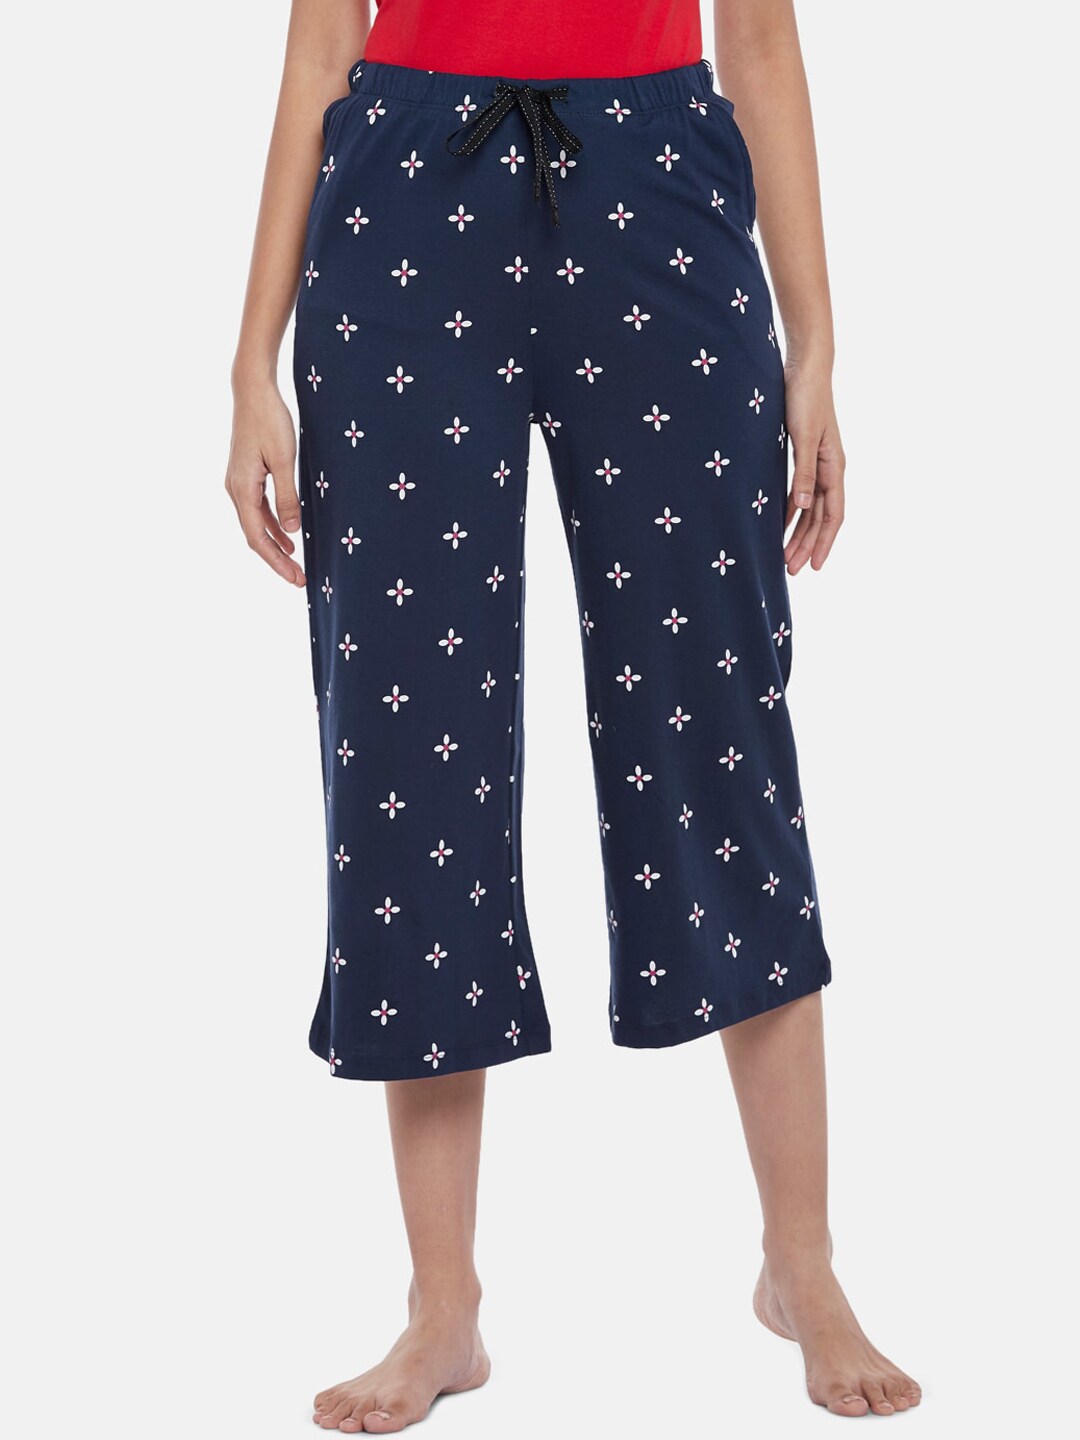 Dreamz by Pantaloons Women Navy Blue Printed Three-Fourth Length Cotton Lounge Pants Price in India